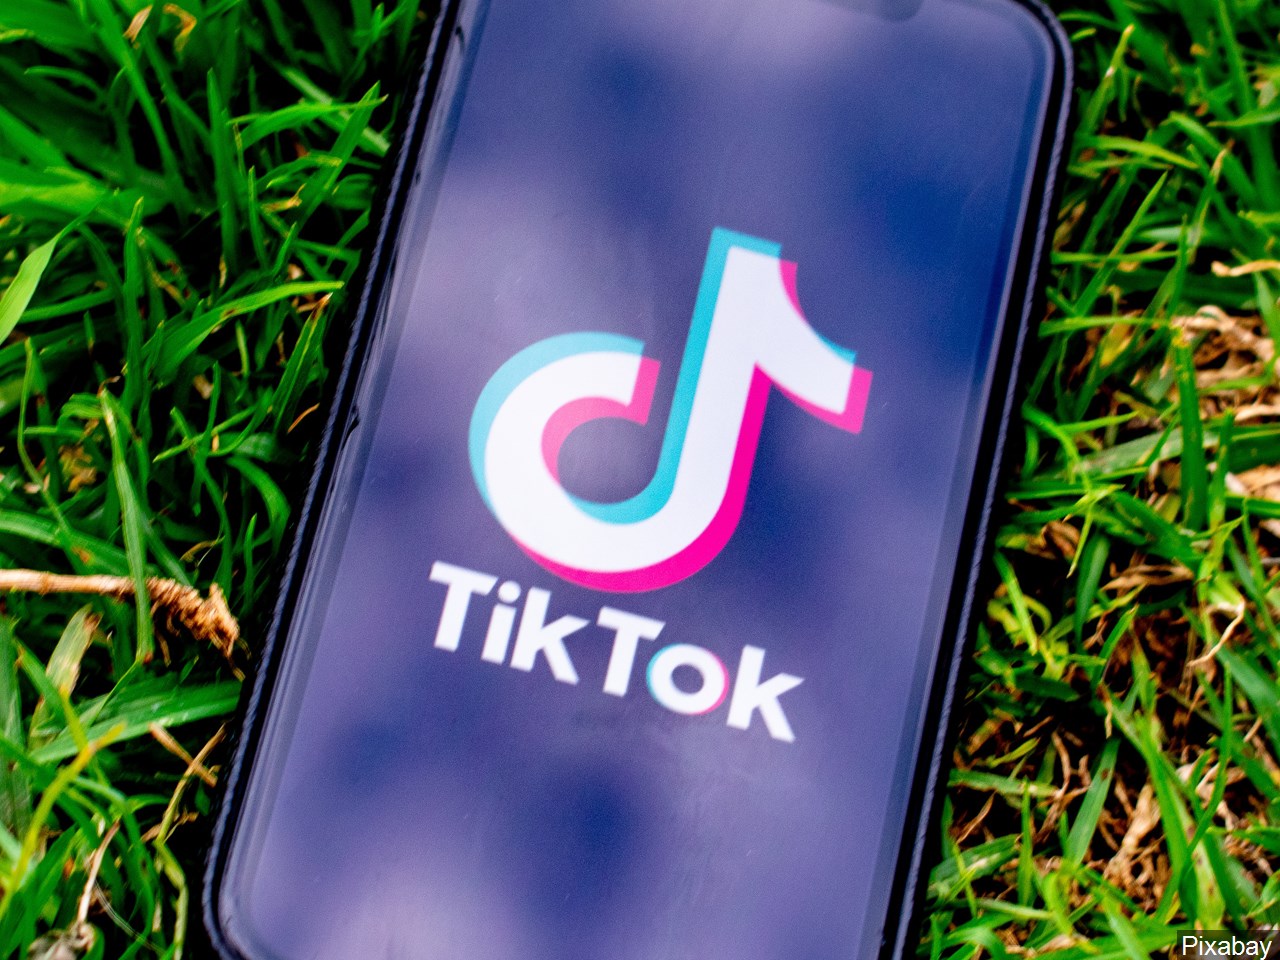 Influencer claims TikTok challenge caused her heart attack